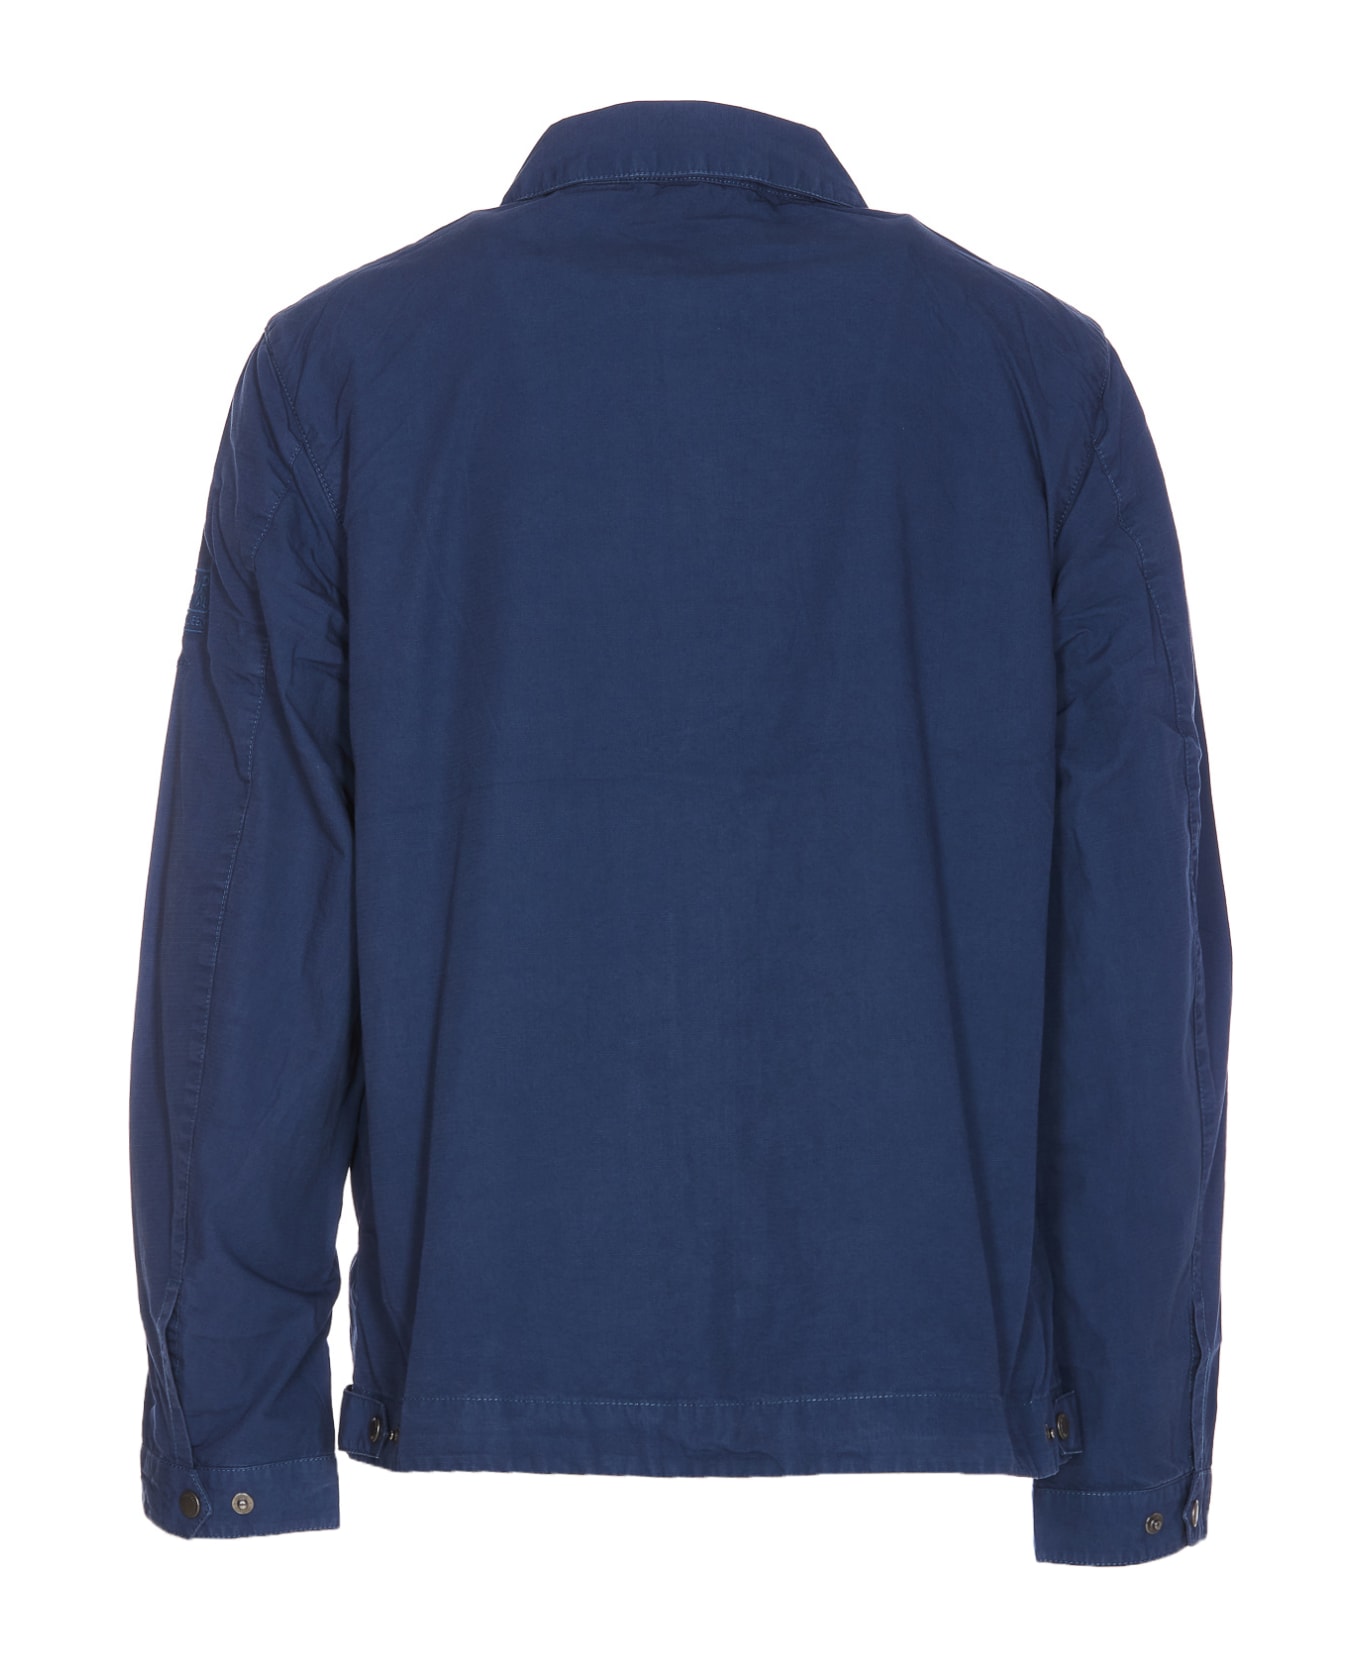 Barbour Casual Blue Jacket - Blue ブレザー